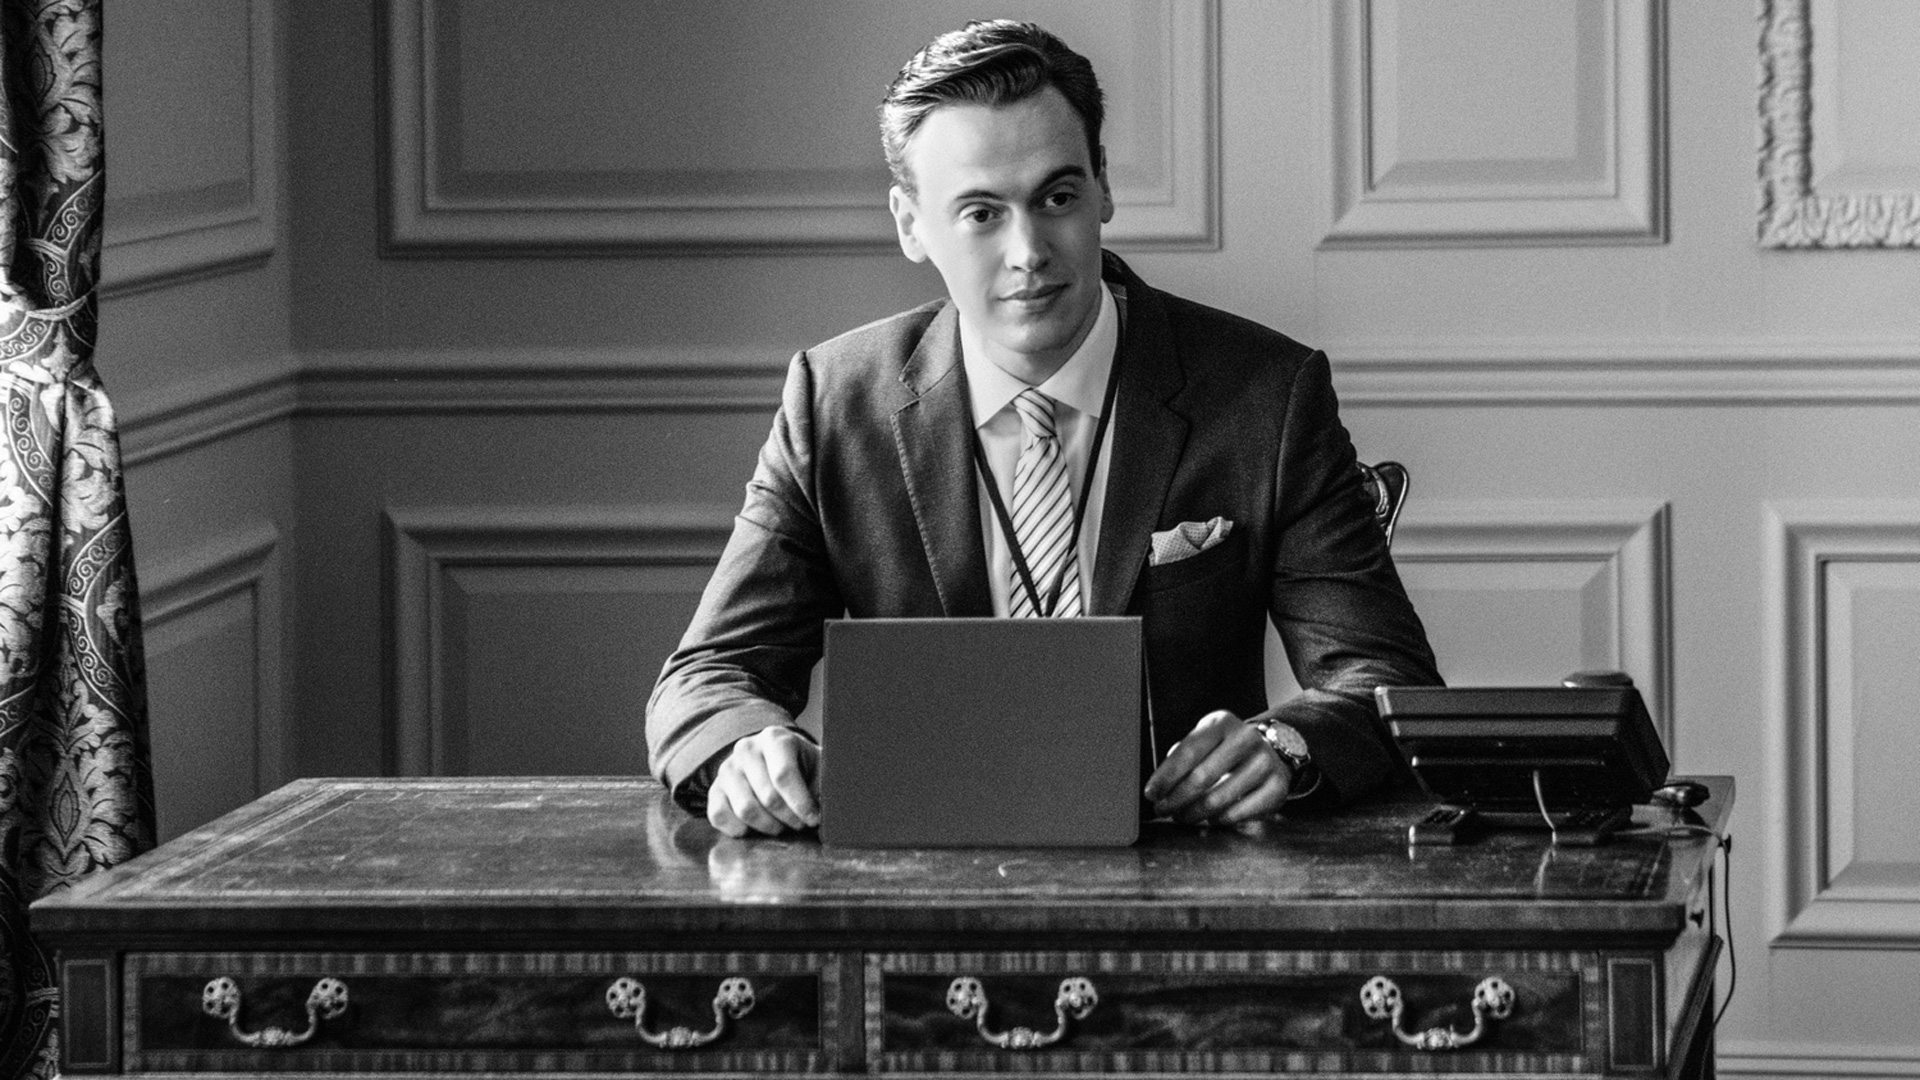 This sophisticated snapshot shows Erich Bergen as Blake Moran in black and white.